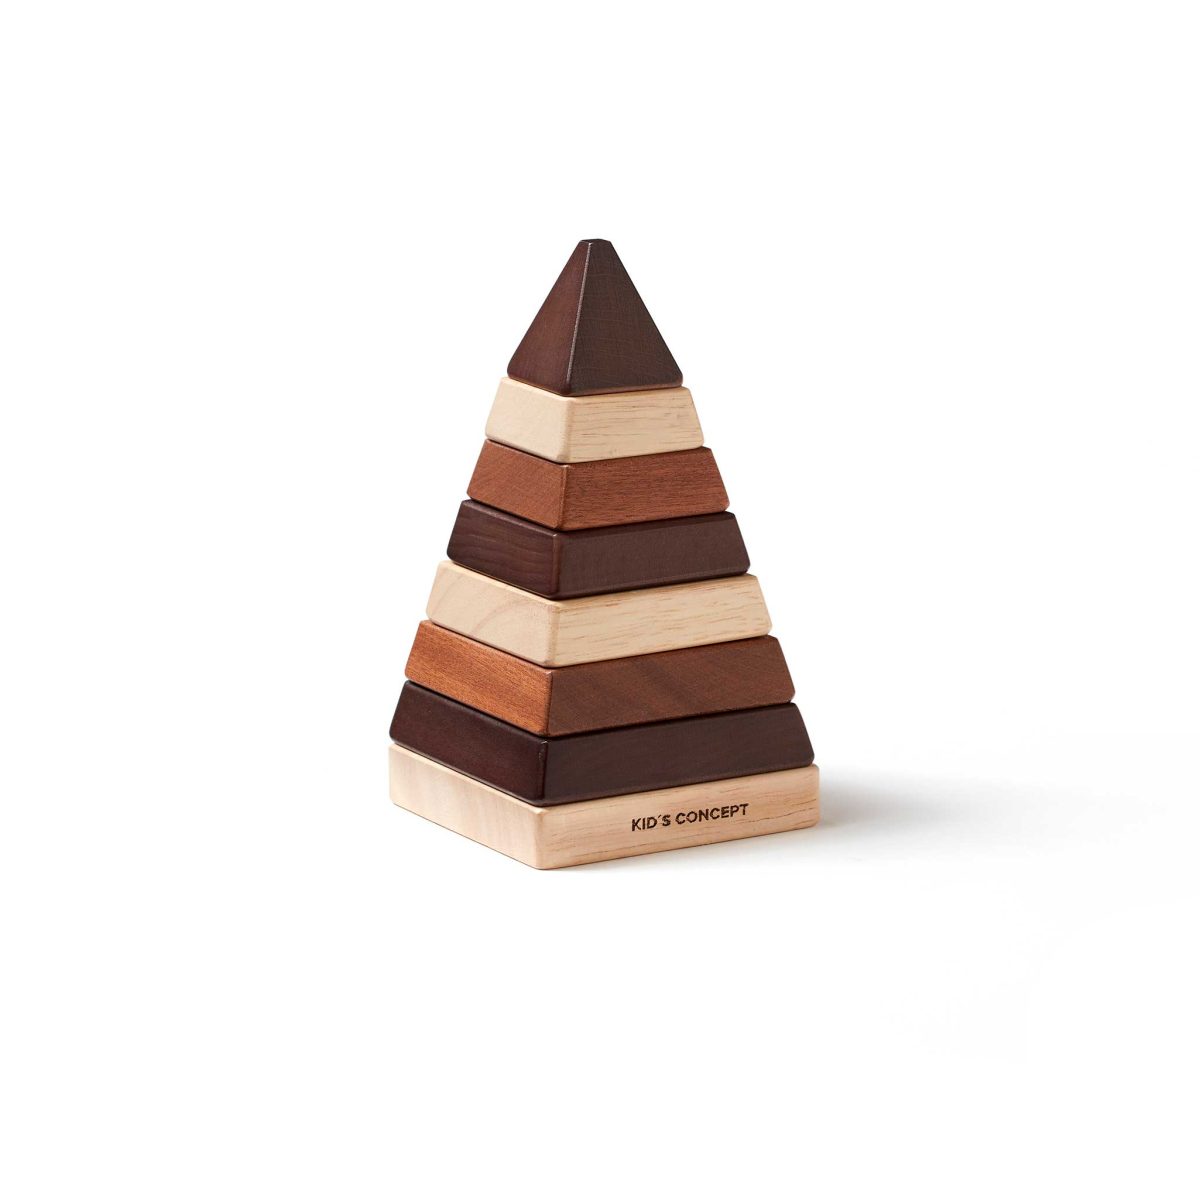 Kid's Concept Stacking Pyramid